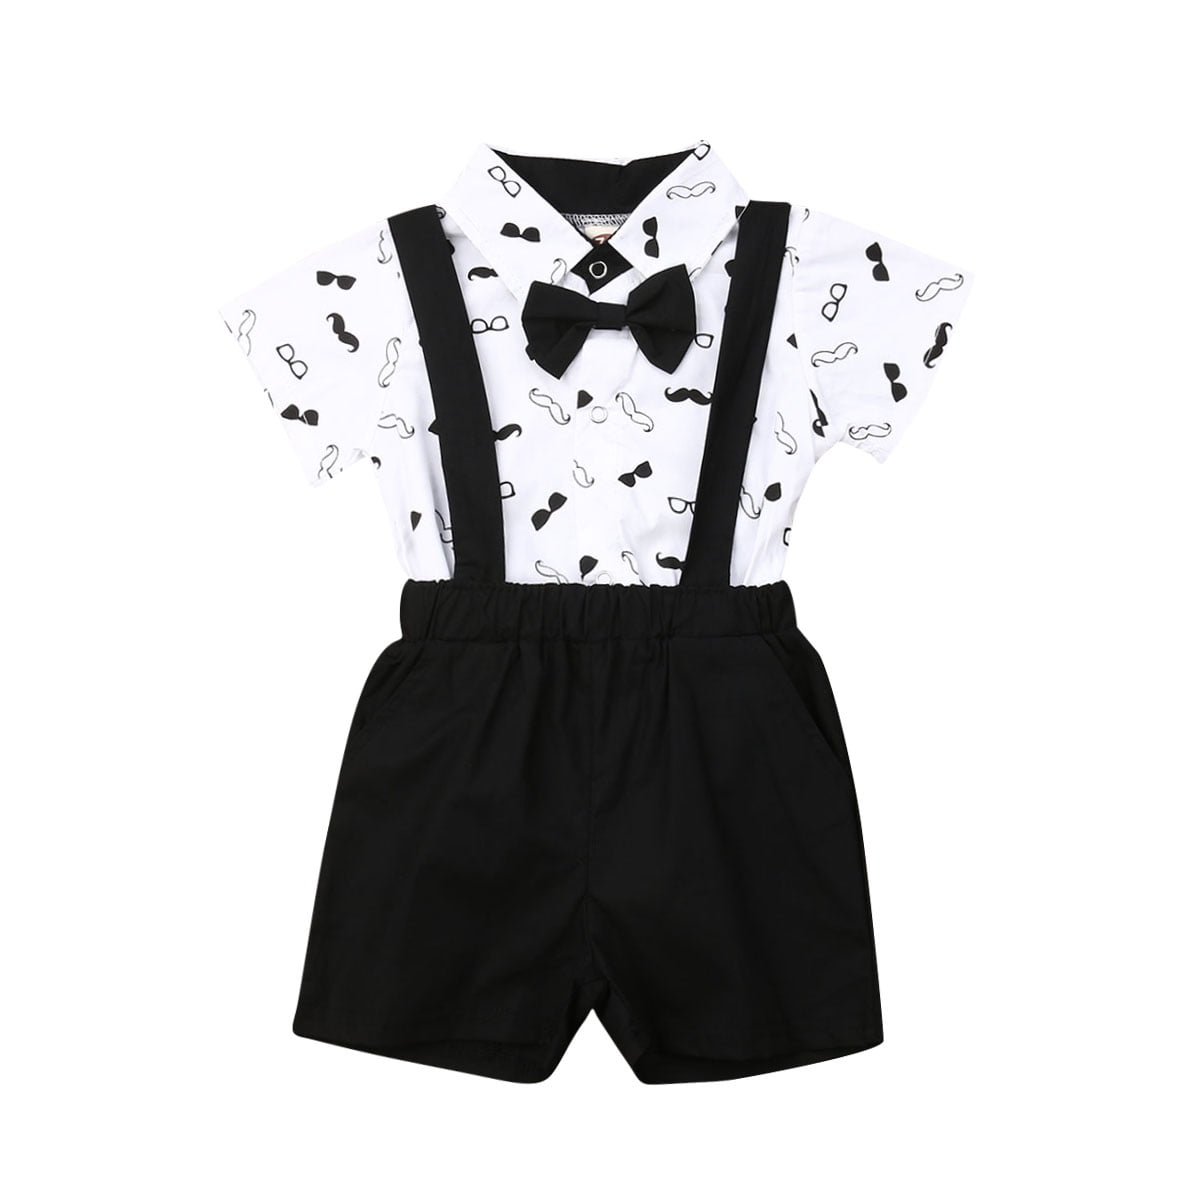 Lilax Baby Boy Gentleman Tuxedo Footie Christmas Holiday Outfit with Bow Tie 